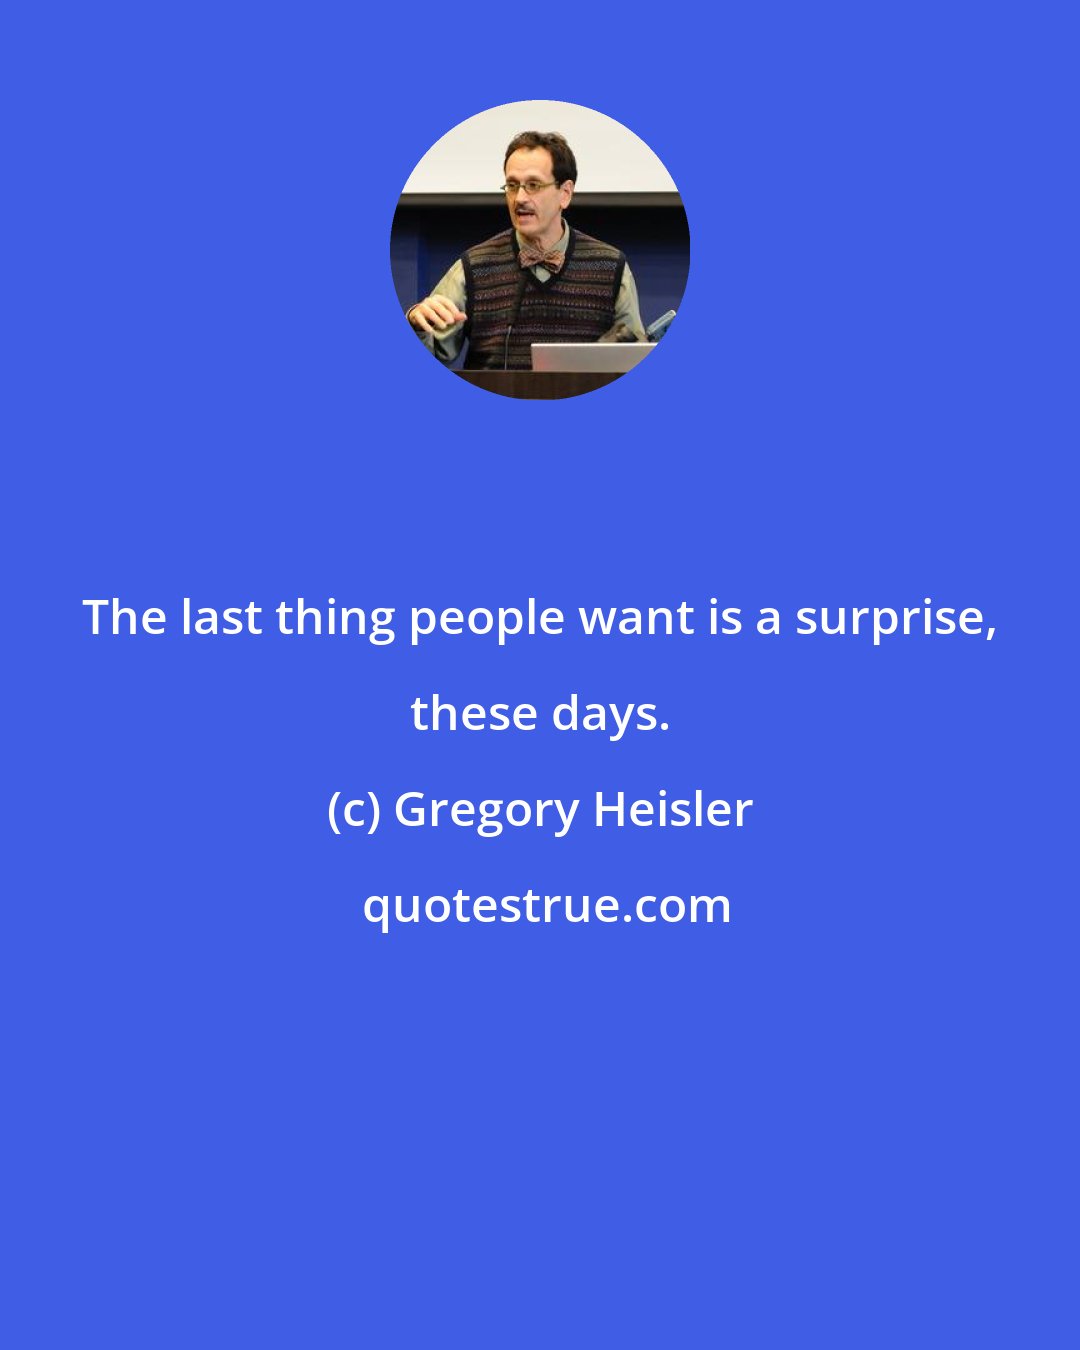 Gregory Heisler: The last thing people want is a surprise, these days.